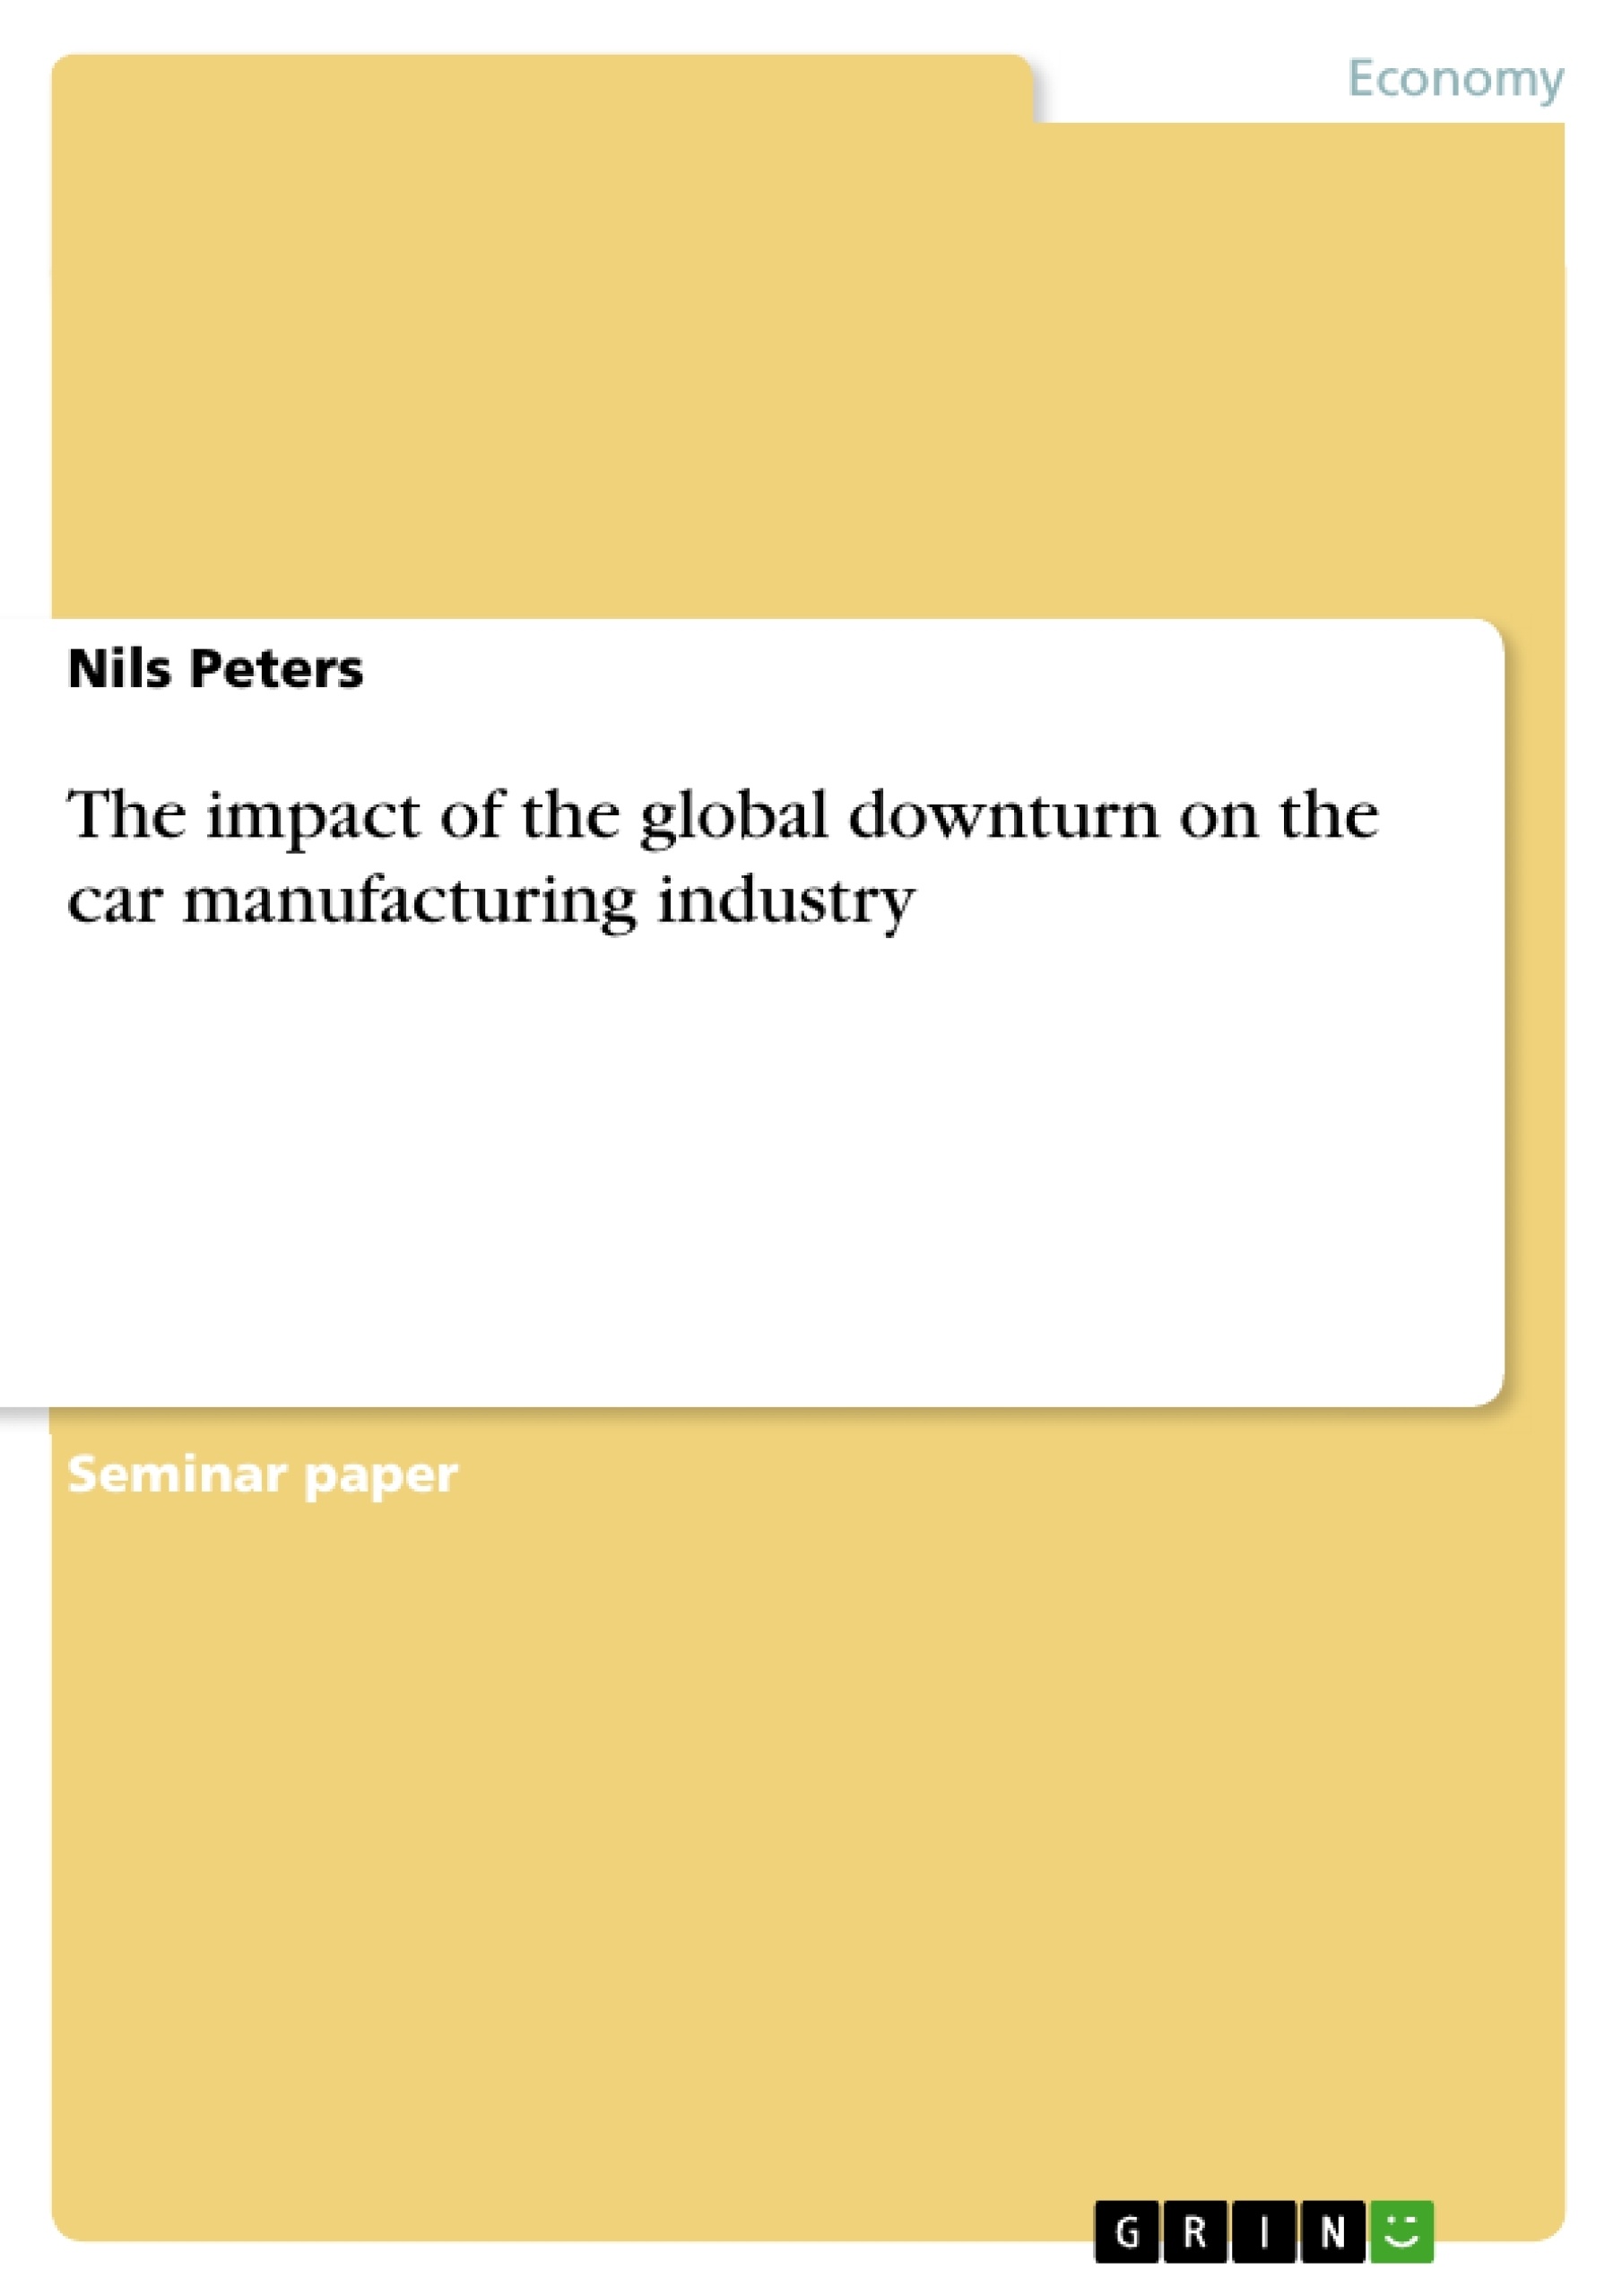 Title: The impact of the global downturn on the car manufacturing industry